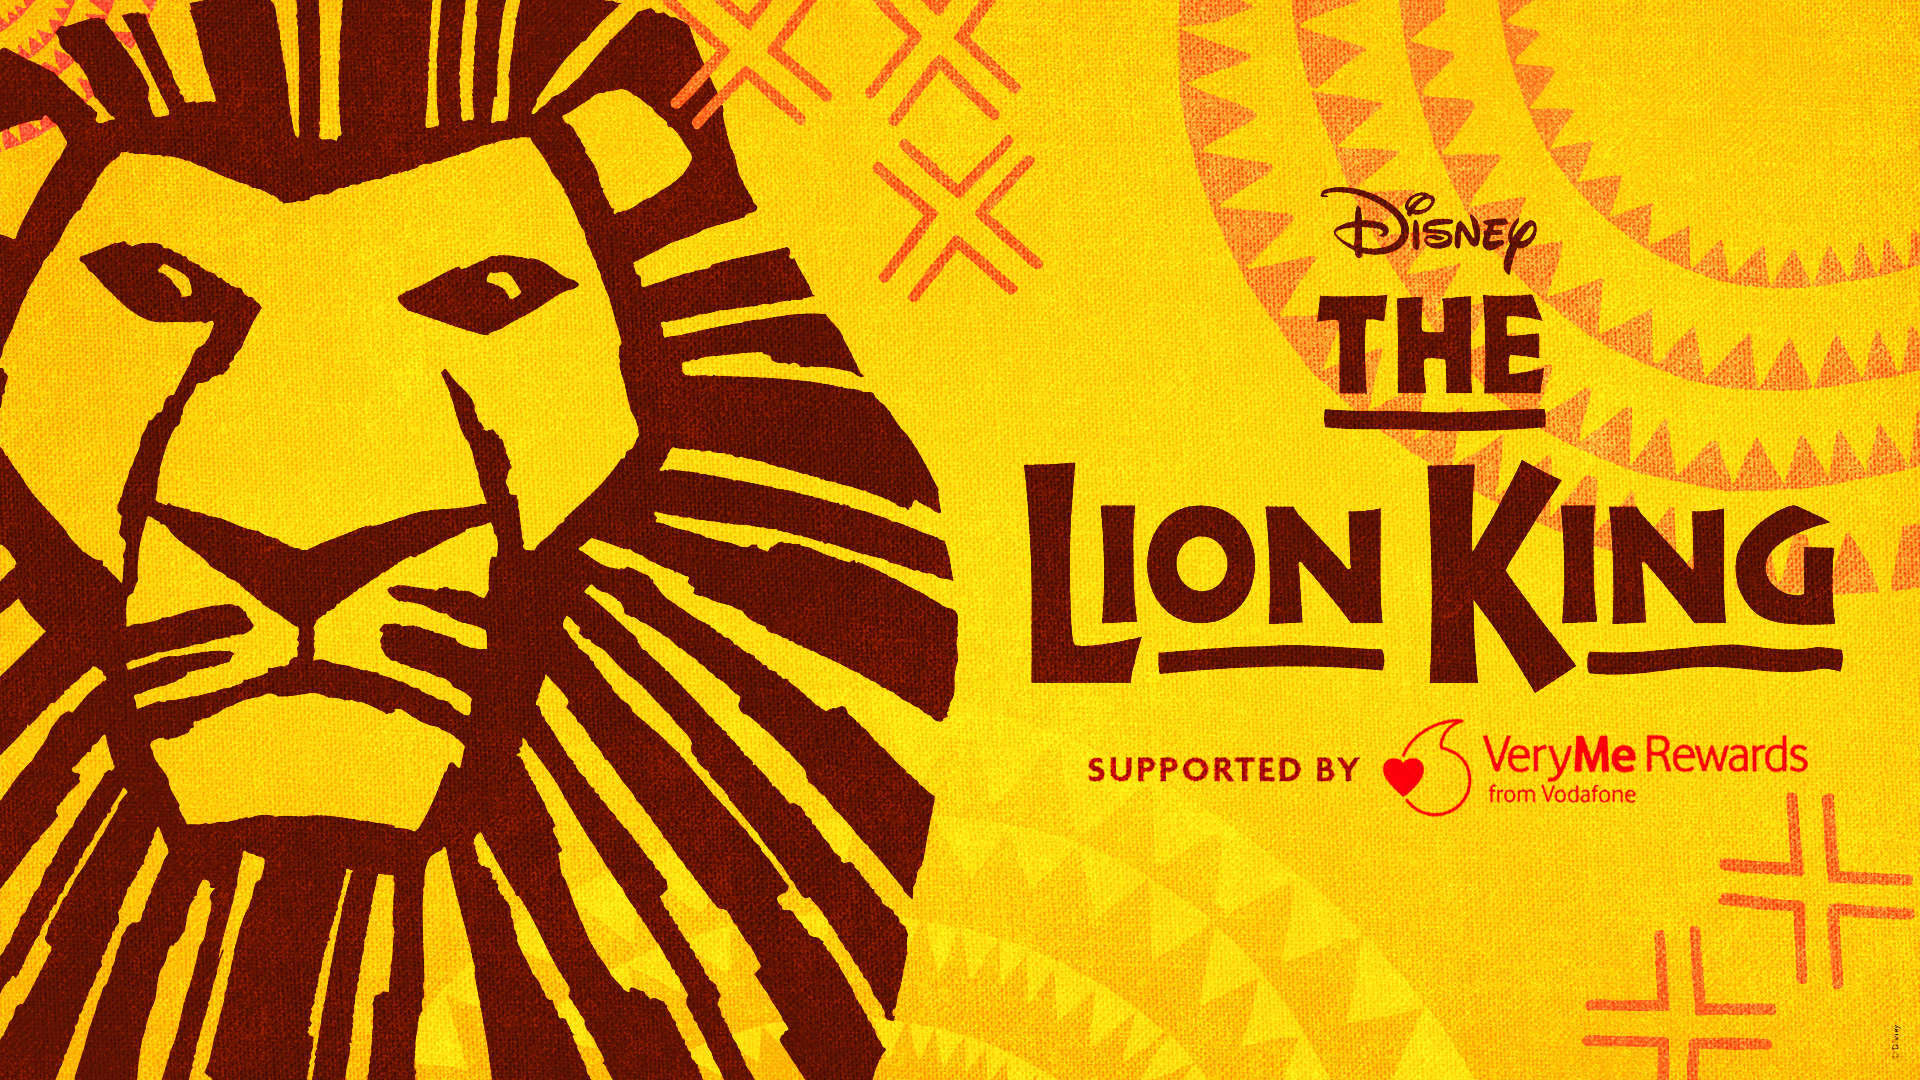 The Lion King at the Palace Theatre